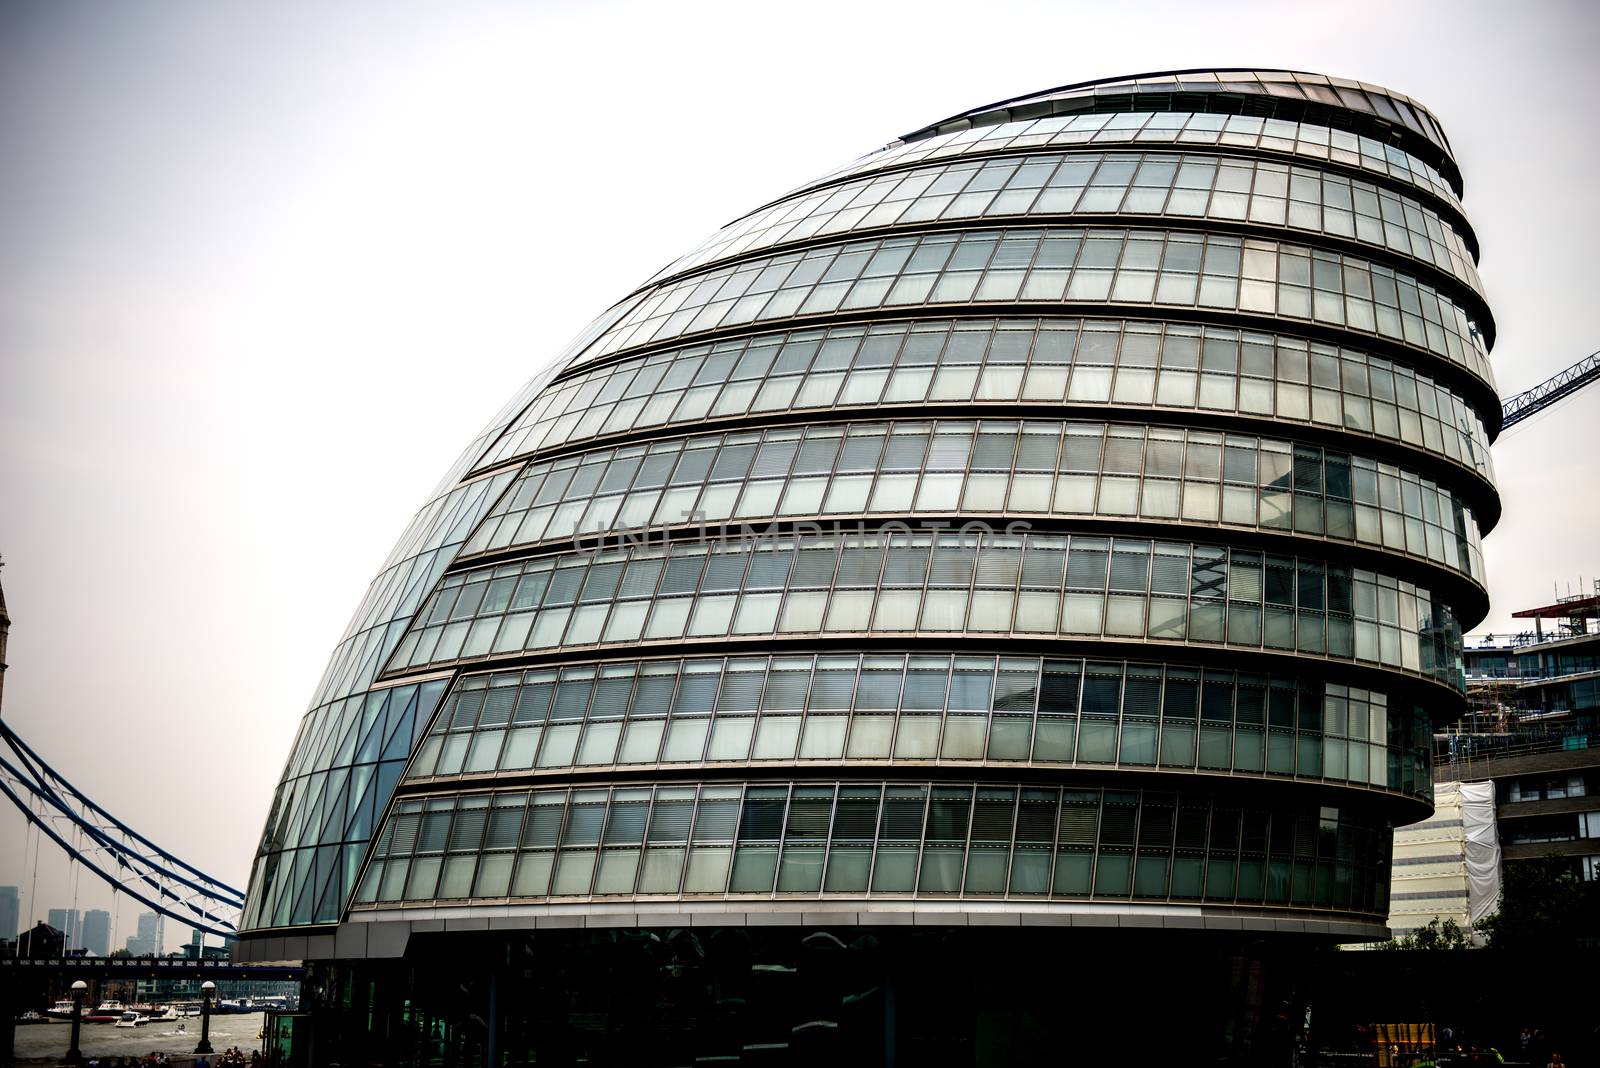 City Hall is the headquarters of the Greater London Authority (GLA), which comprises the Mayor of London and the London Assembly. Located in Southwark, on the south bank of the River Thames near Tower Bridge.

The building has an unusual, bulbous shape, intended to reduce its surface area and thus improve energy efficiency, although the excess energy consumption caused by the exclusive use of glass (in a double facade) overwhelms the benefit of shape.

Photographed using Nikon-D800E (36 megapixels) DSLR with AF-S NIKKOR 24-70 mm f/2.8G ED lens at focal length 48 mm, ISO 100, and exposure 1/1600 sec at f/2.8.